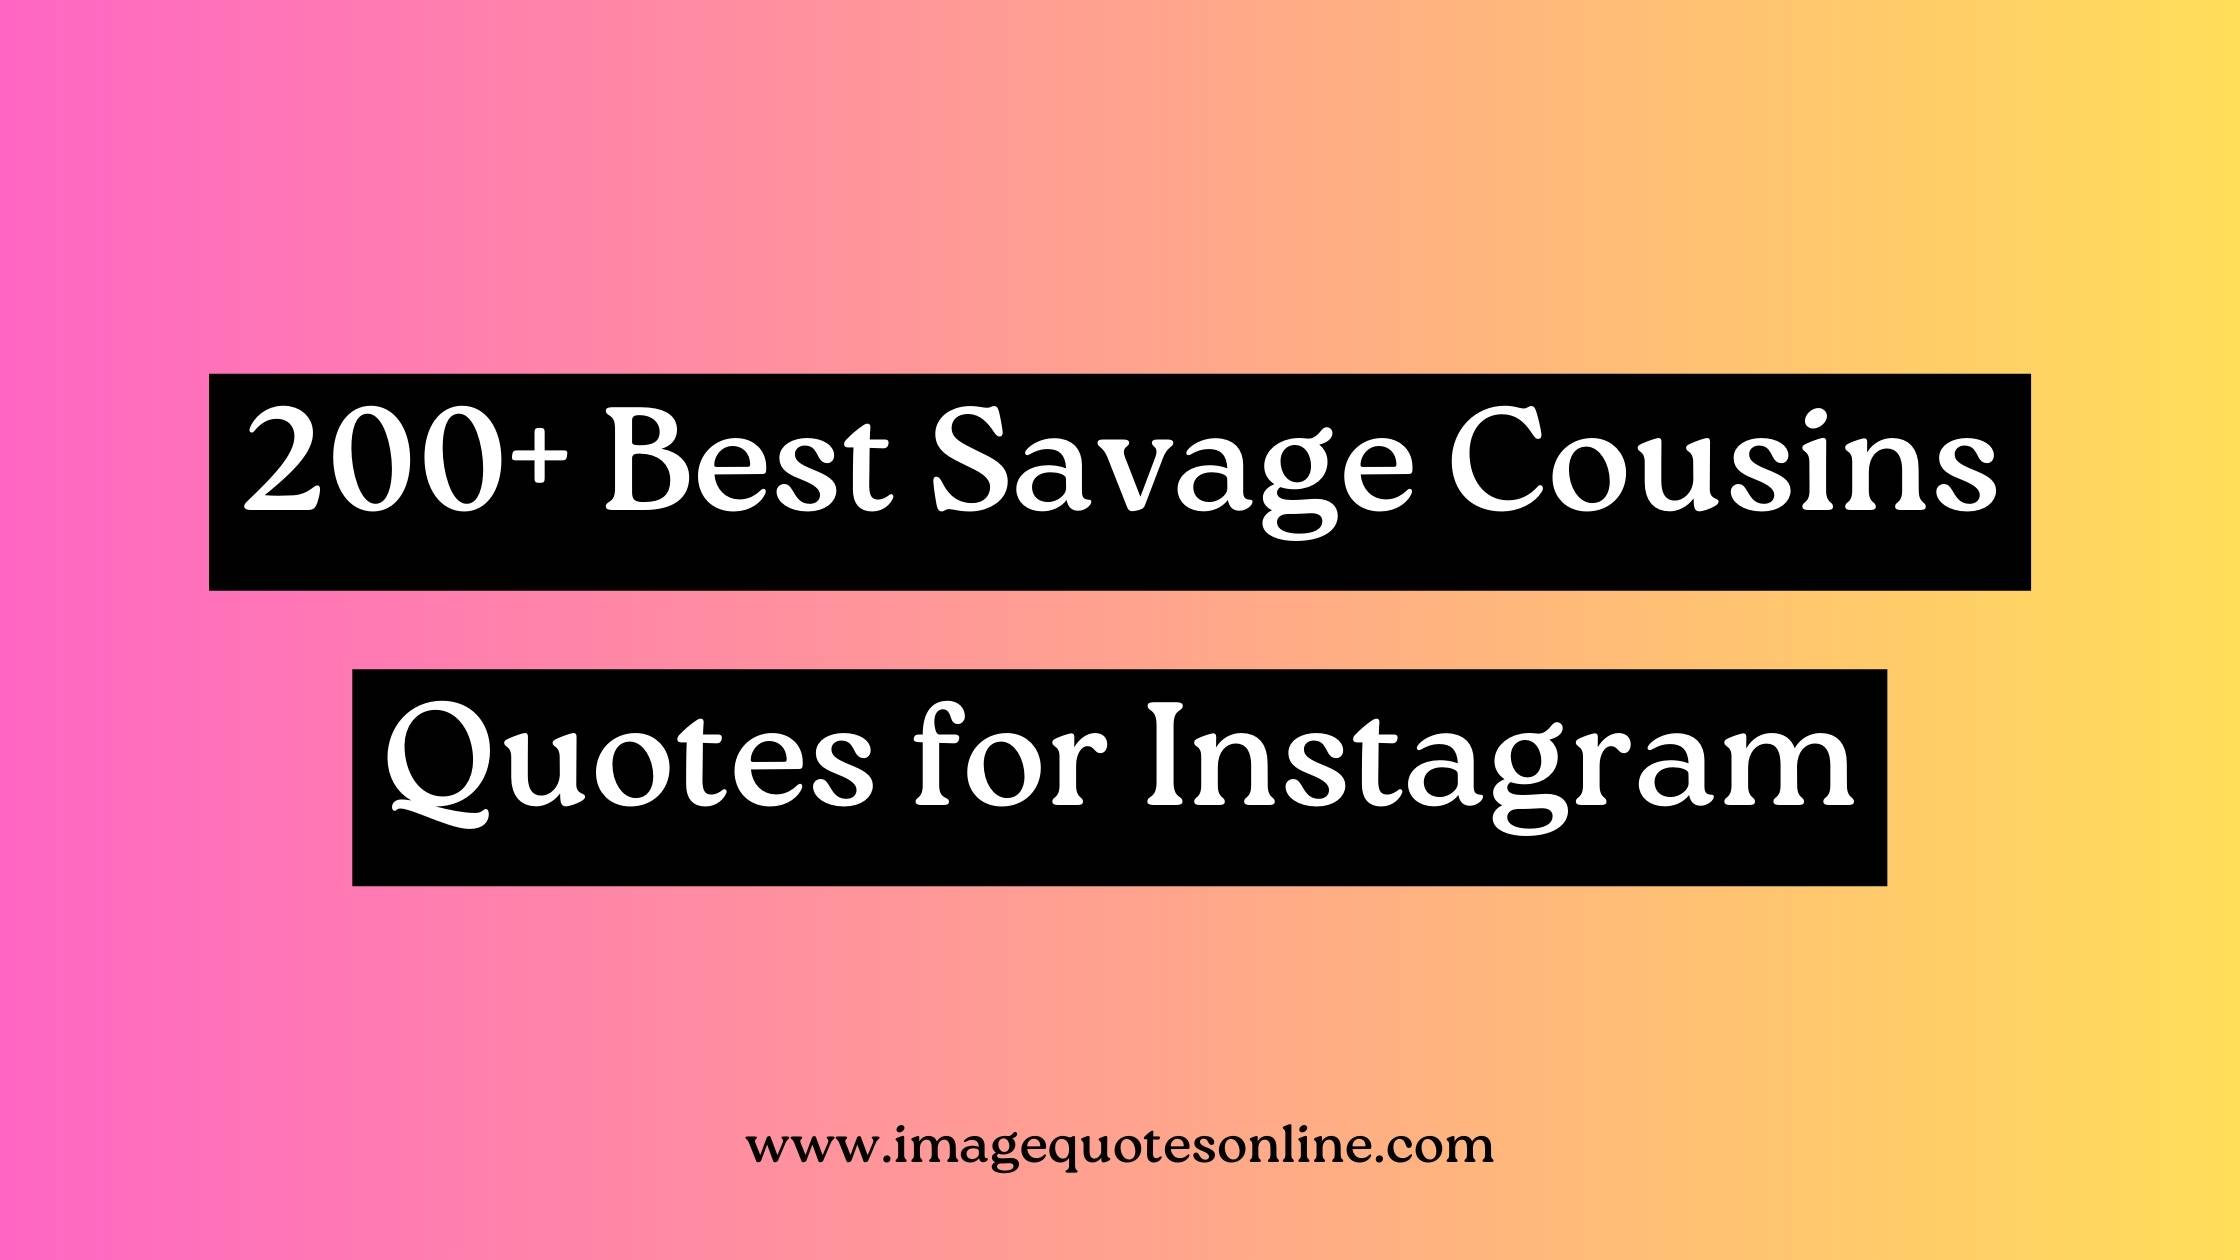 savage cousins quotes for instagram